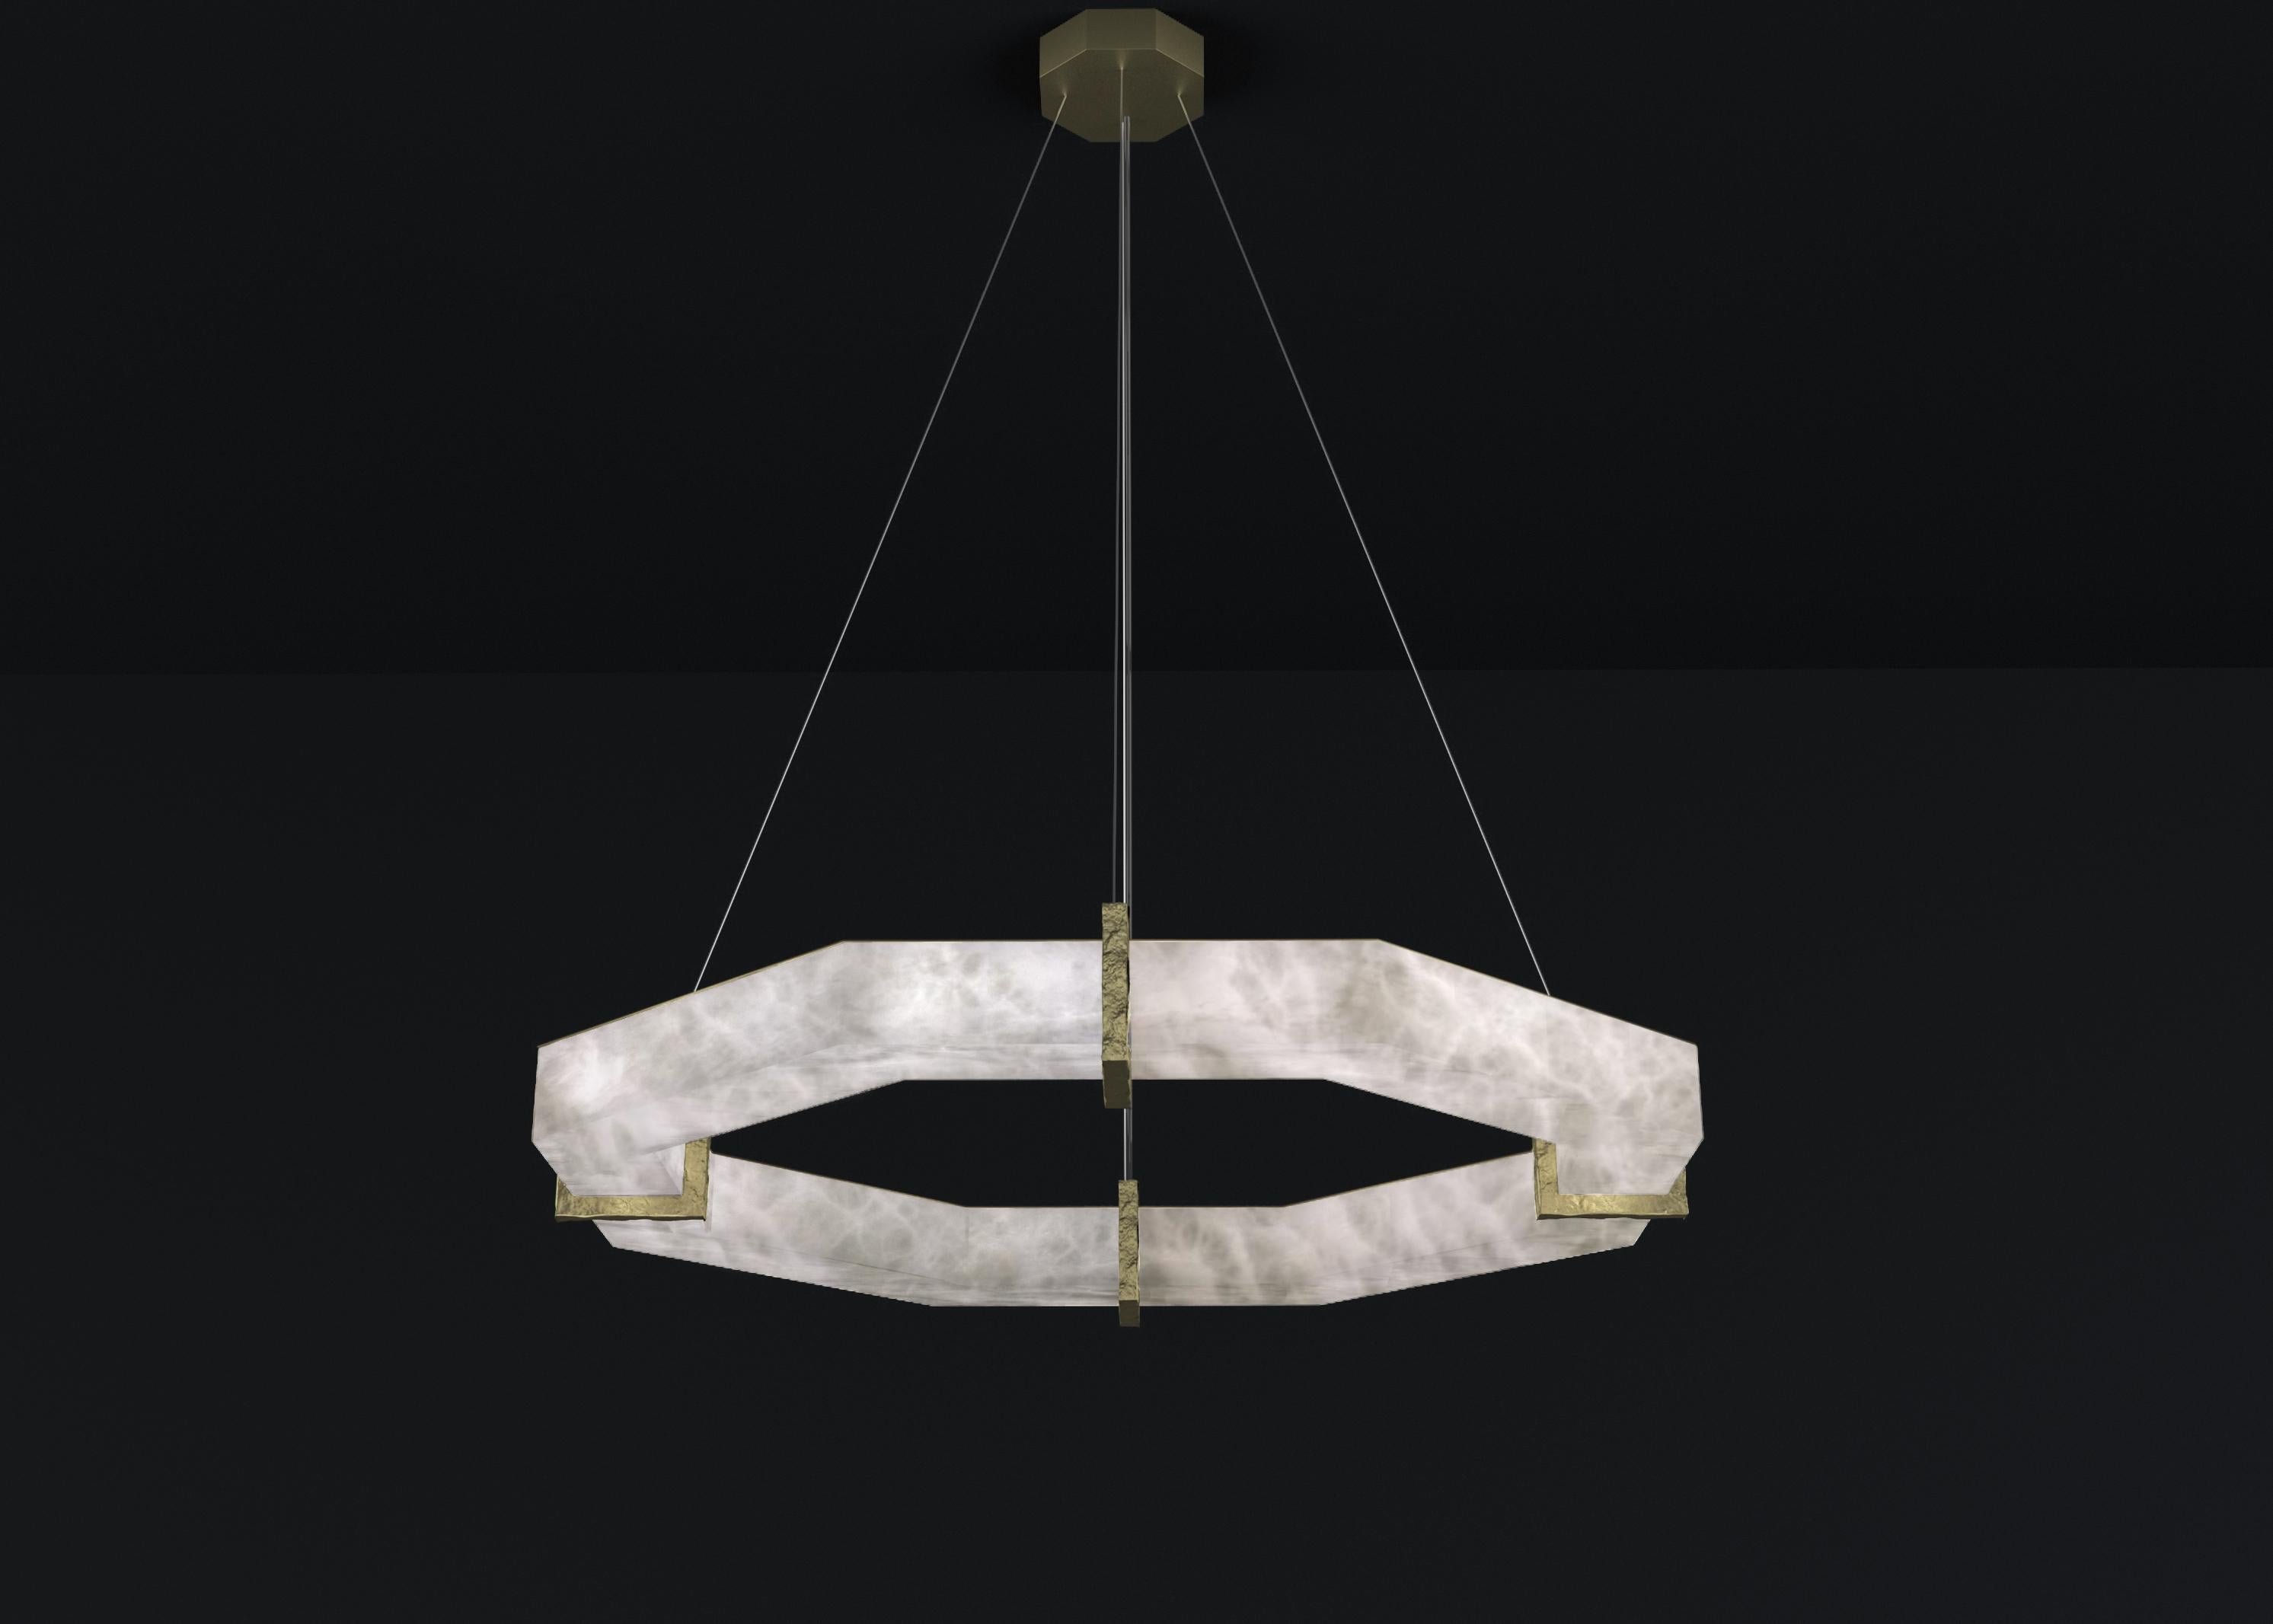 Efesto Brushed Brass Pendant Lamp by Alabastro Italiano
Dimensions: D 83 x W 80 x H 11 cm.
Materials: White alabaster and brass.

Available in different finishes: Shiny Silver, Bronze, Brushed Brass, Ruggine of Florence, Brushed Burnished, Shiny